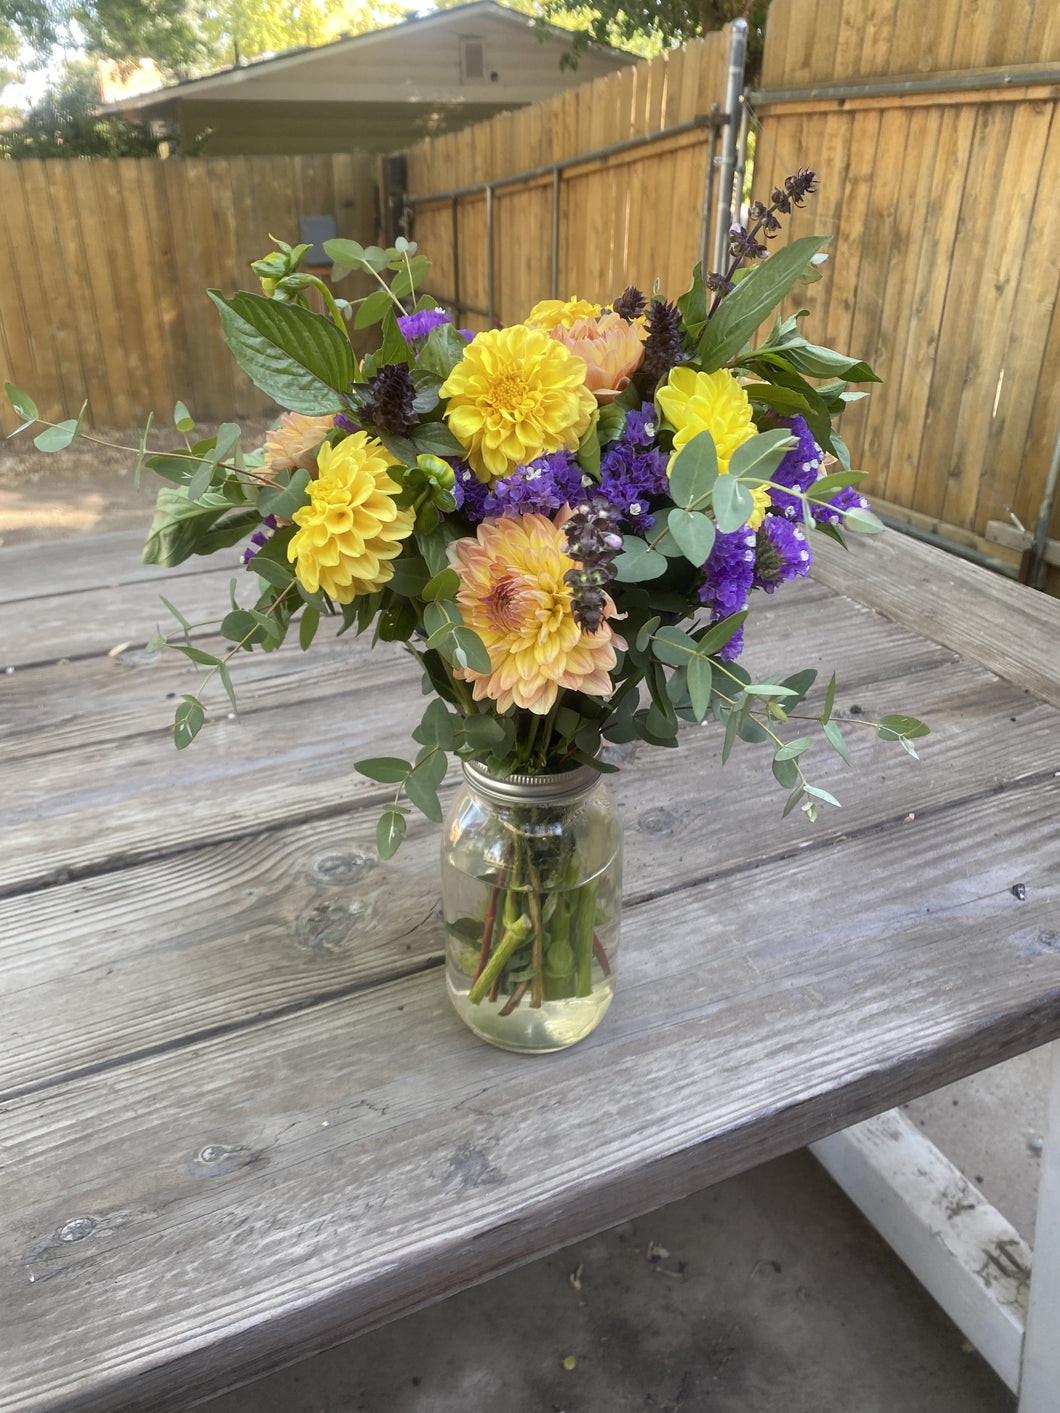 Off-season/Winter Flower Club - Local Delivery